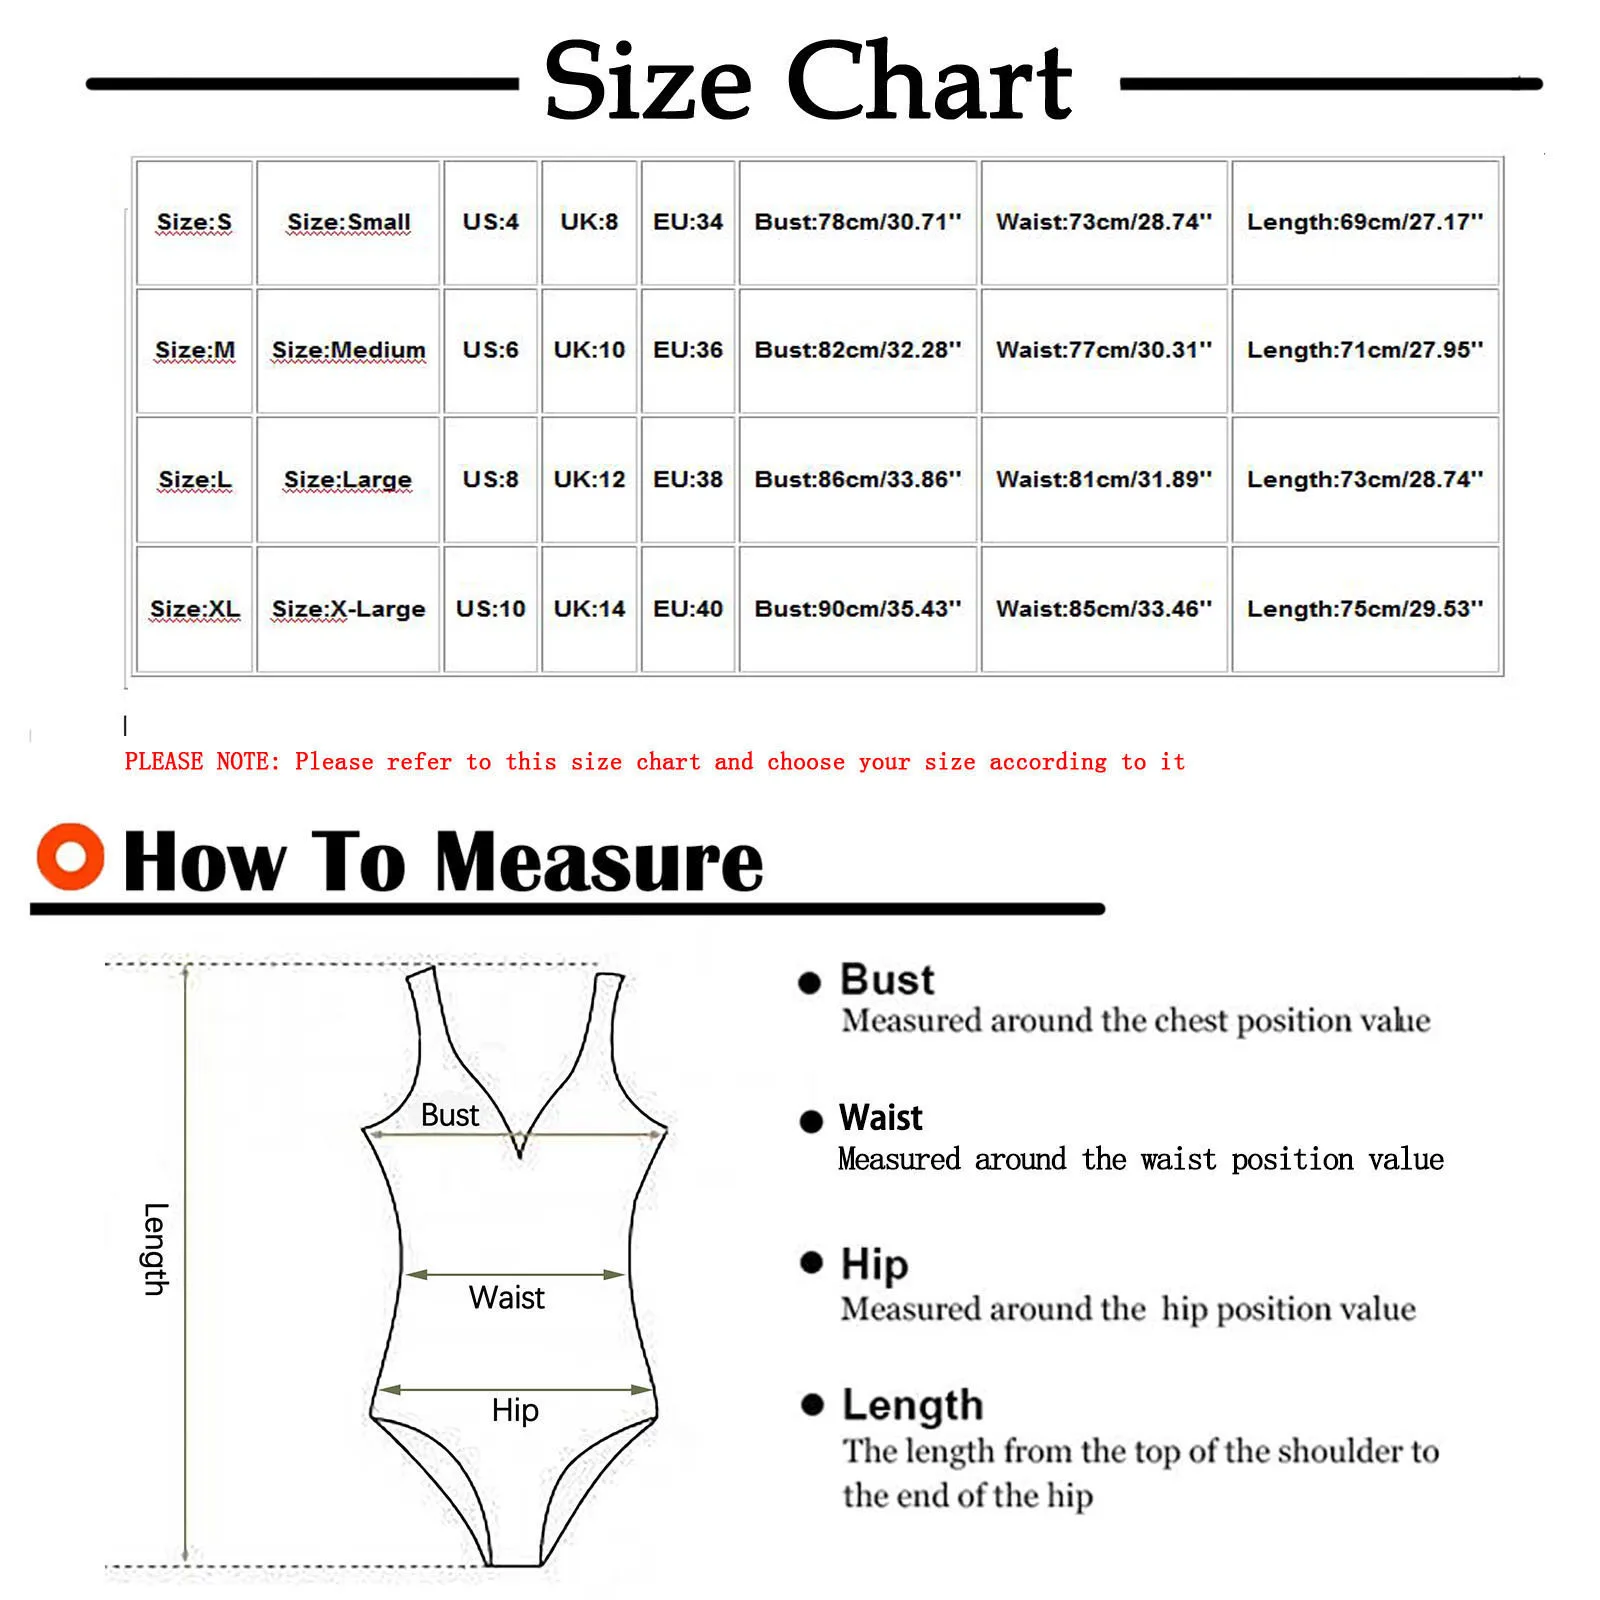 

Bodysuit Women 2021 Plus Size Patent Leather Sexy Lingerie Catsuit Latex Tempting Exciting Sleepwear Handcuffs Sex Nightwear FFT